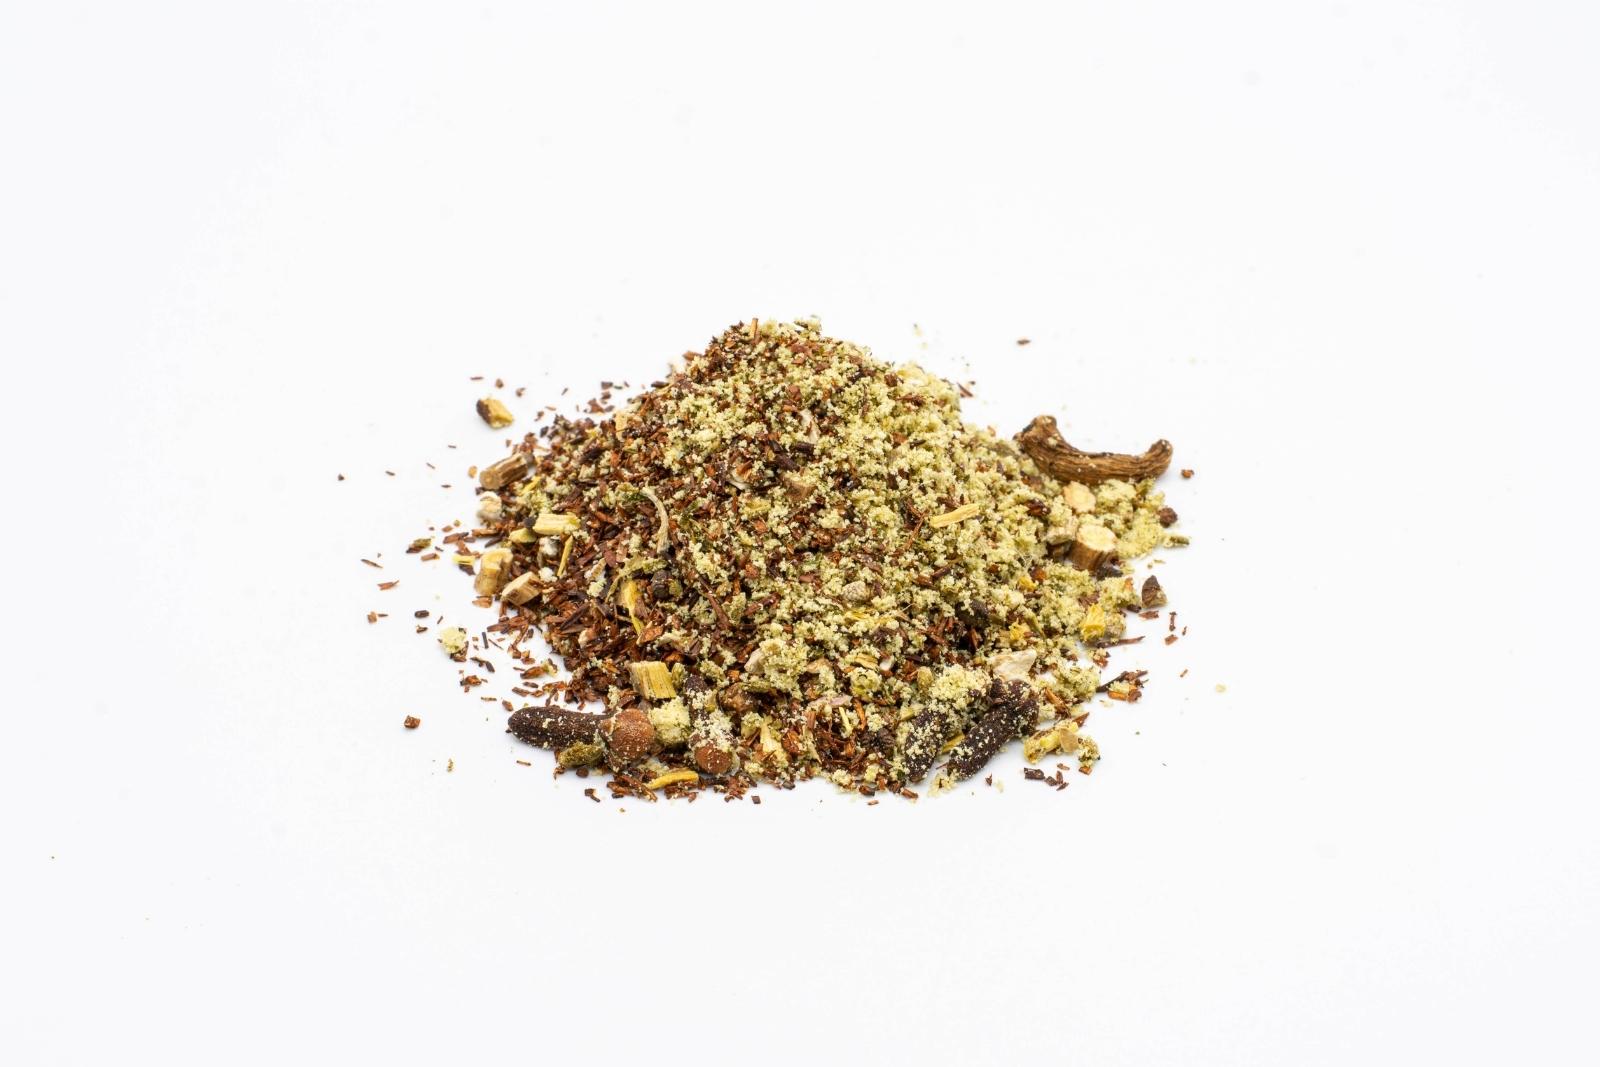 A pile of loose Cosmic Cleanse Tea by The Brothers Apothecary on a white background